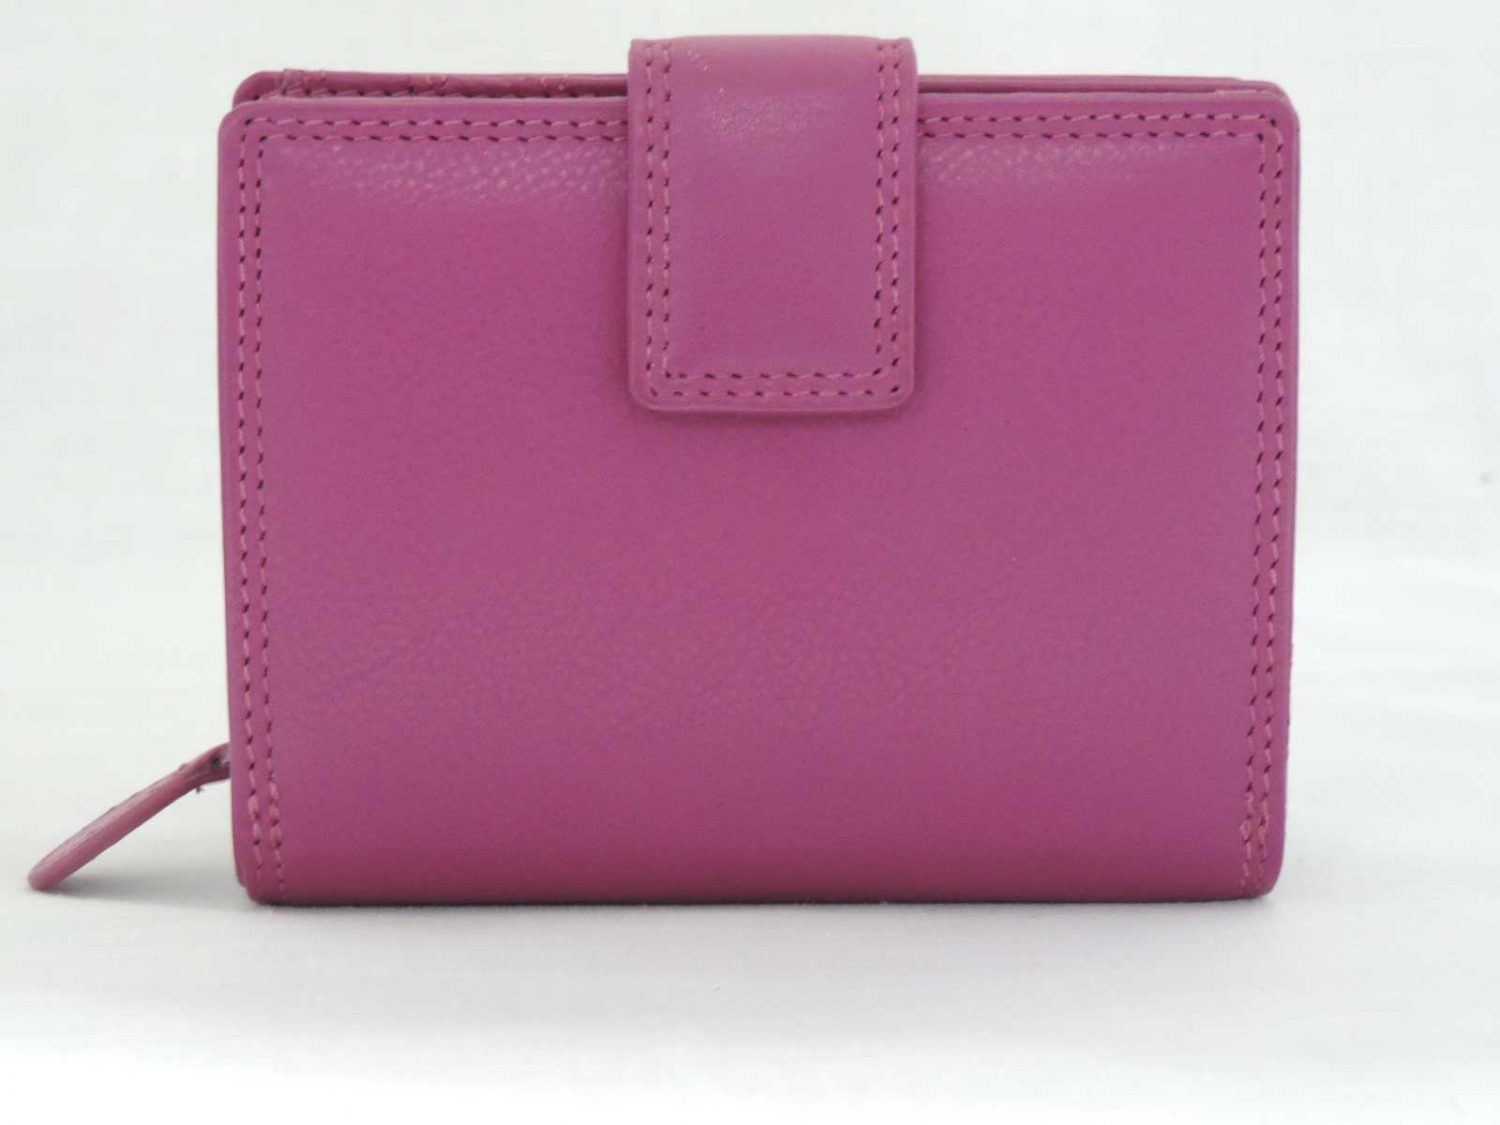 Ladies Leather Large Tabbed Multi-Section Purse/Wallet by Golunski  Colourful | Wallets for women leather, Purse wallet, Leather